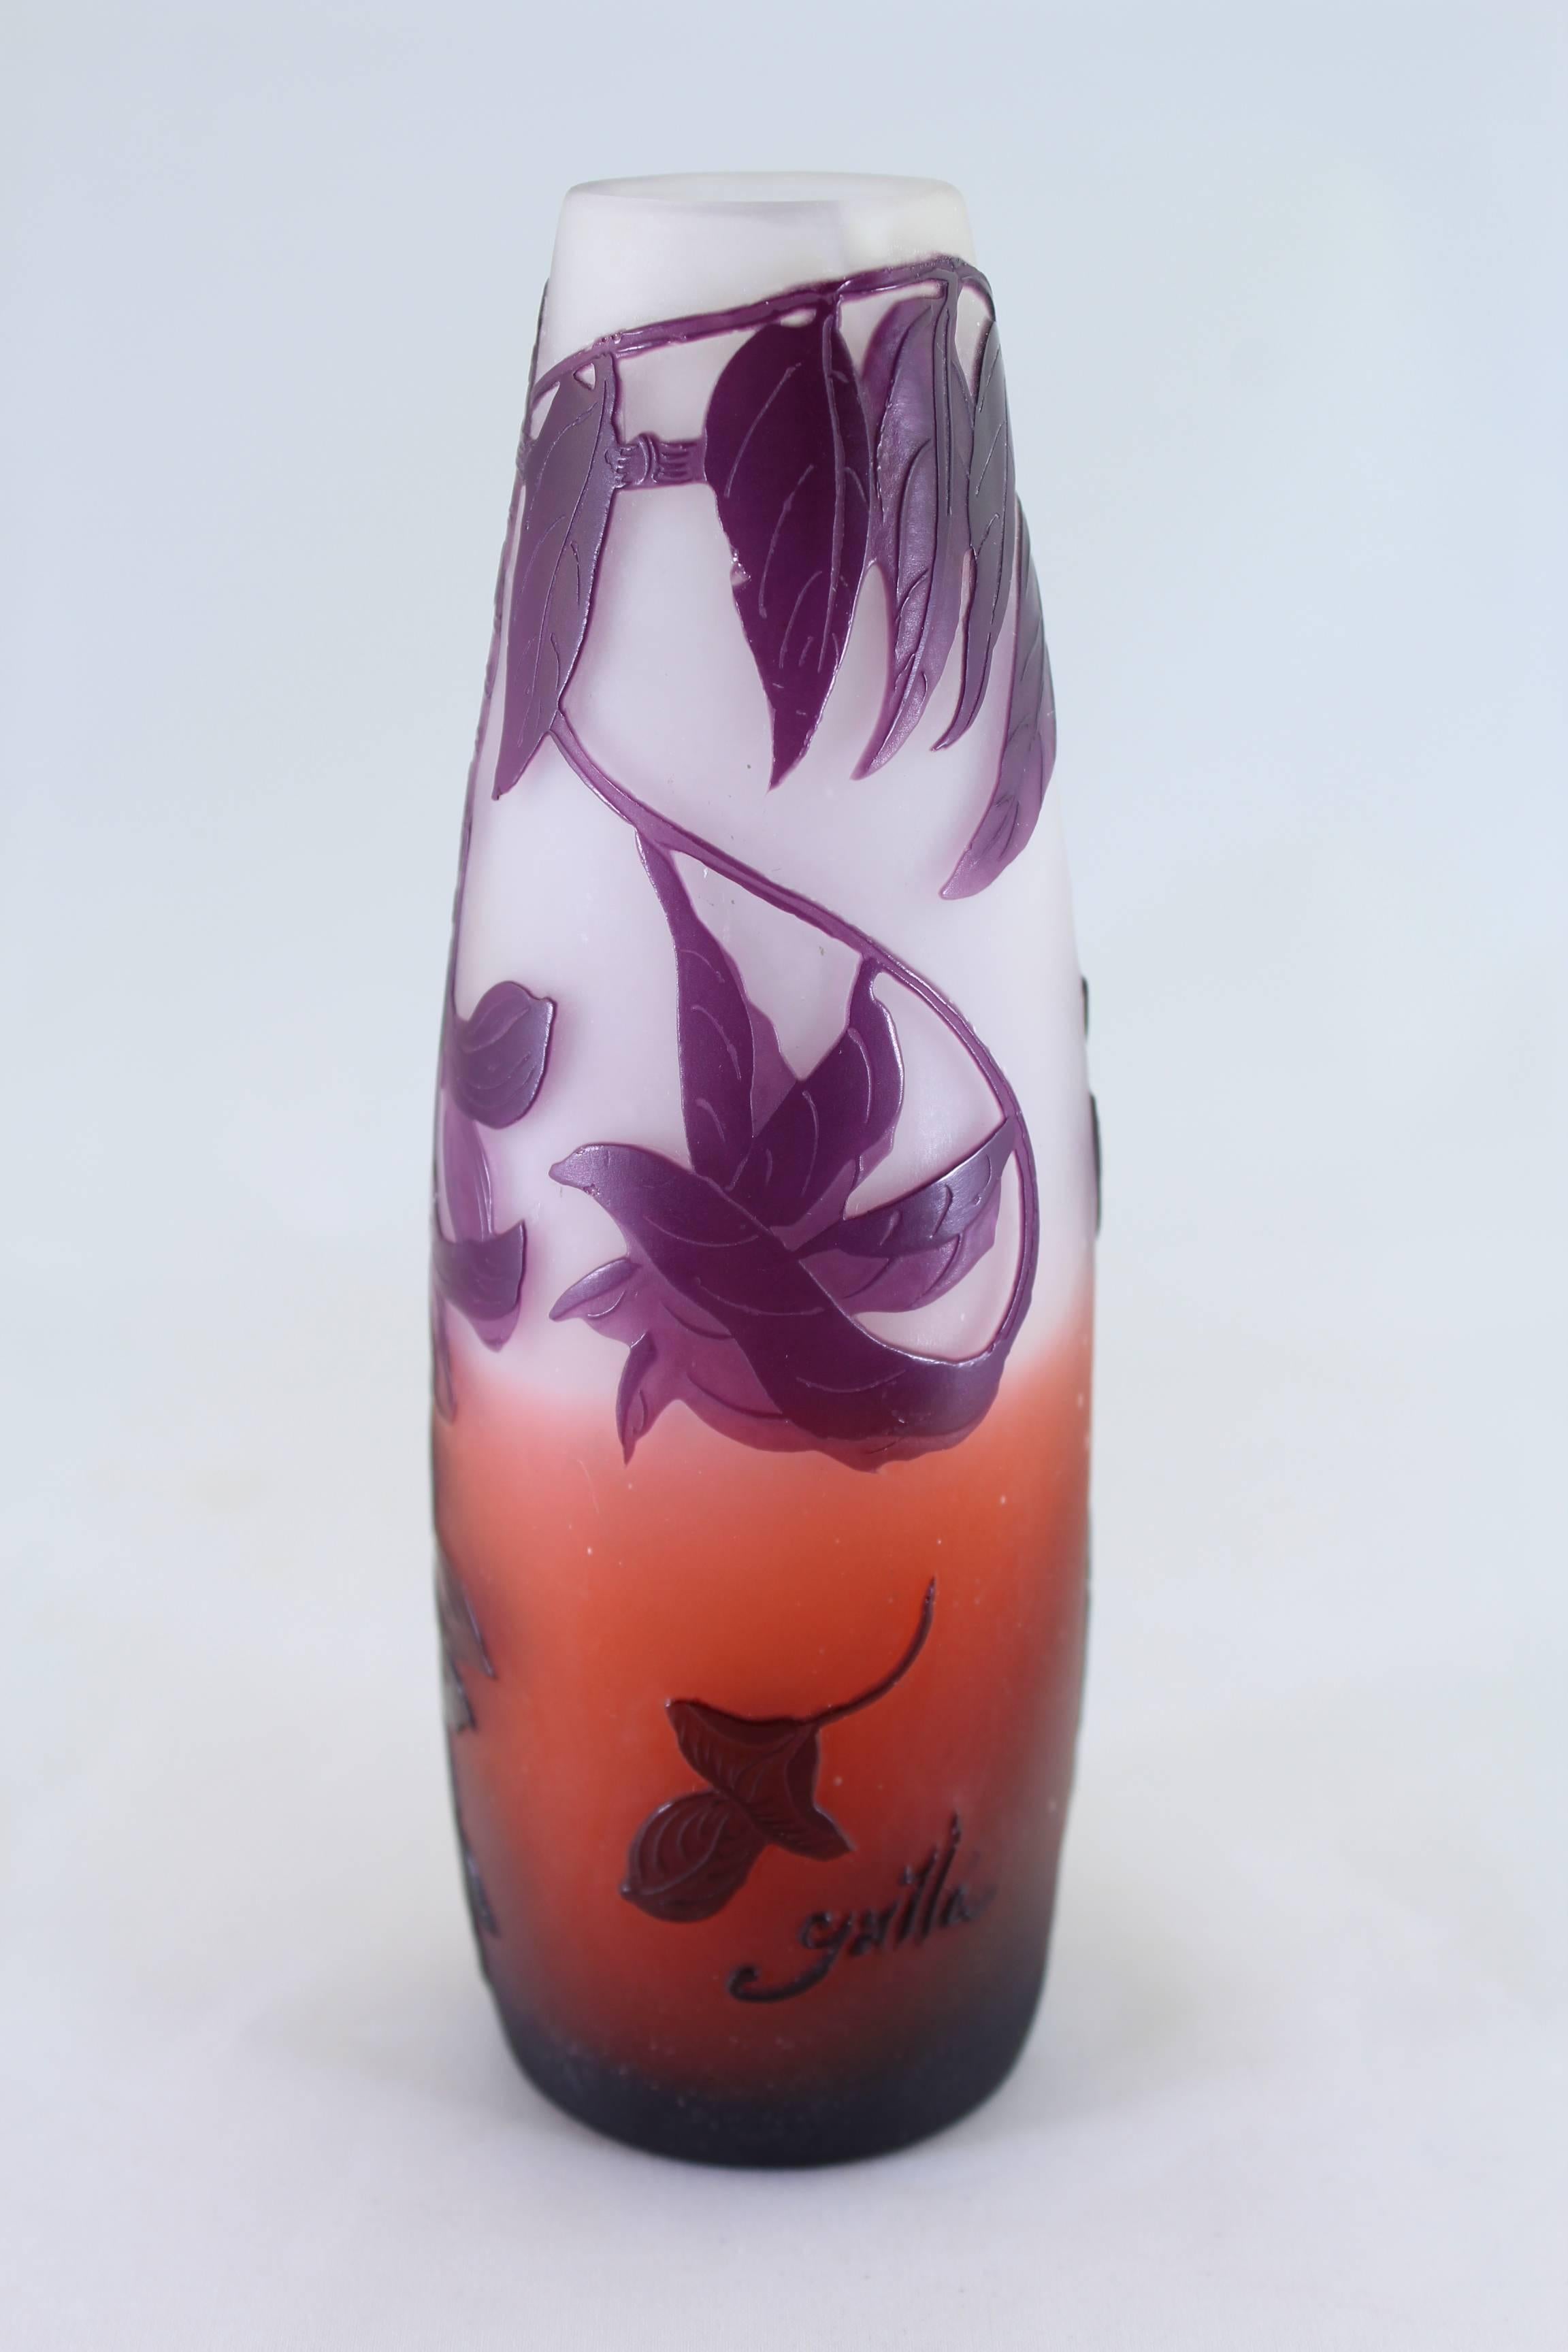 Emile Galle three color cabinet vase consisting of cream, umber orange and purple with cameo acid etched leaves, vines and flower buds.
Signed in cameo: Galle.
Height: 6.4 inches.

Please view my other Art Glass pieces by Galle, DAUM Nancy,